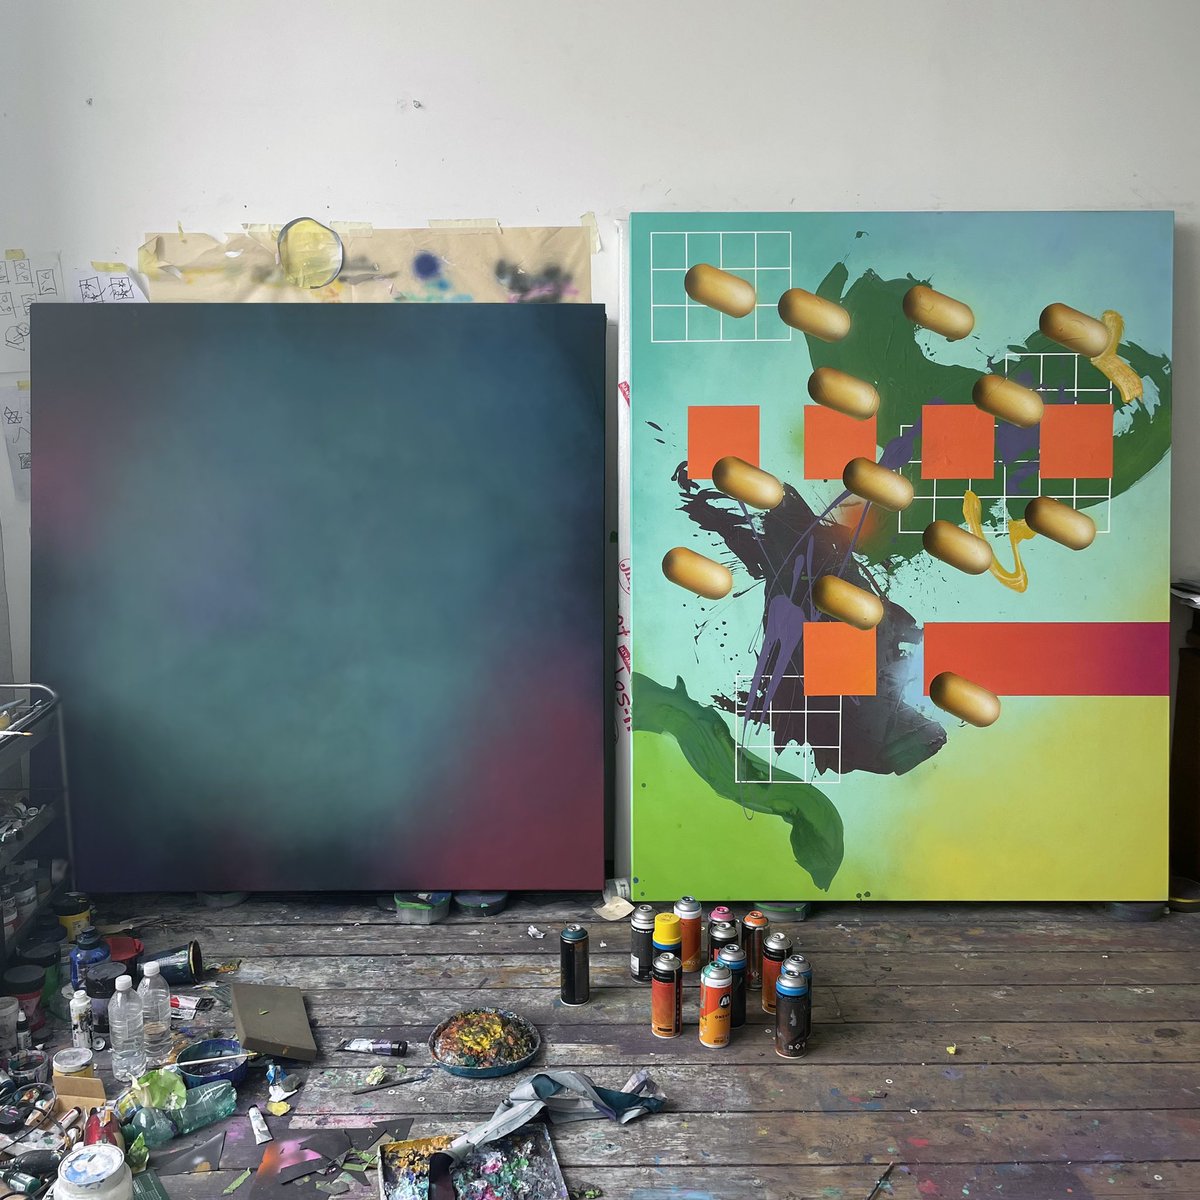 📸 Studio, July 2022. Something new on the left, looking forward to sharing some updates on this soon 
#artiststudio #abstractpainting #geometricart #artcollector  #brandmarketing #brandcollaboration #cooladvertising #freshart #coolartwork #contemporaryartcollectors #interiorhome